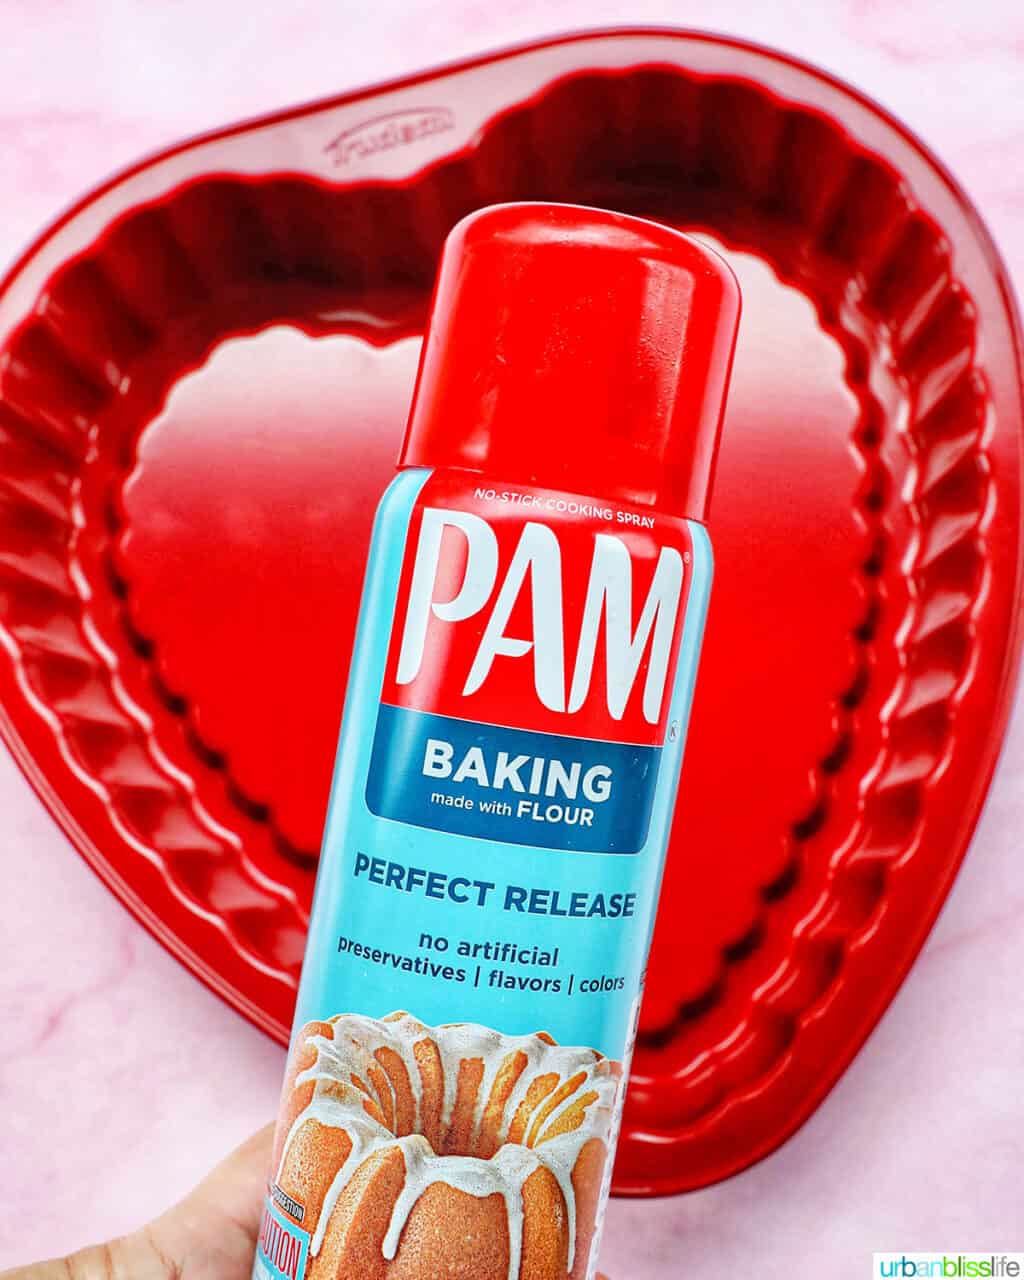 Pam baking spray over a red heart-shaped baking pan.